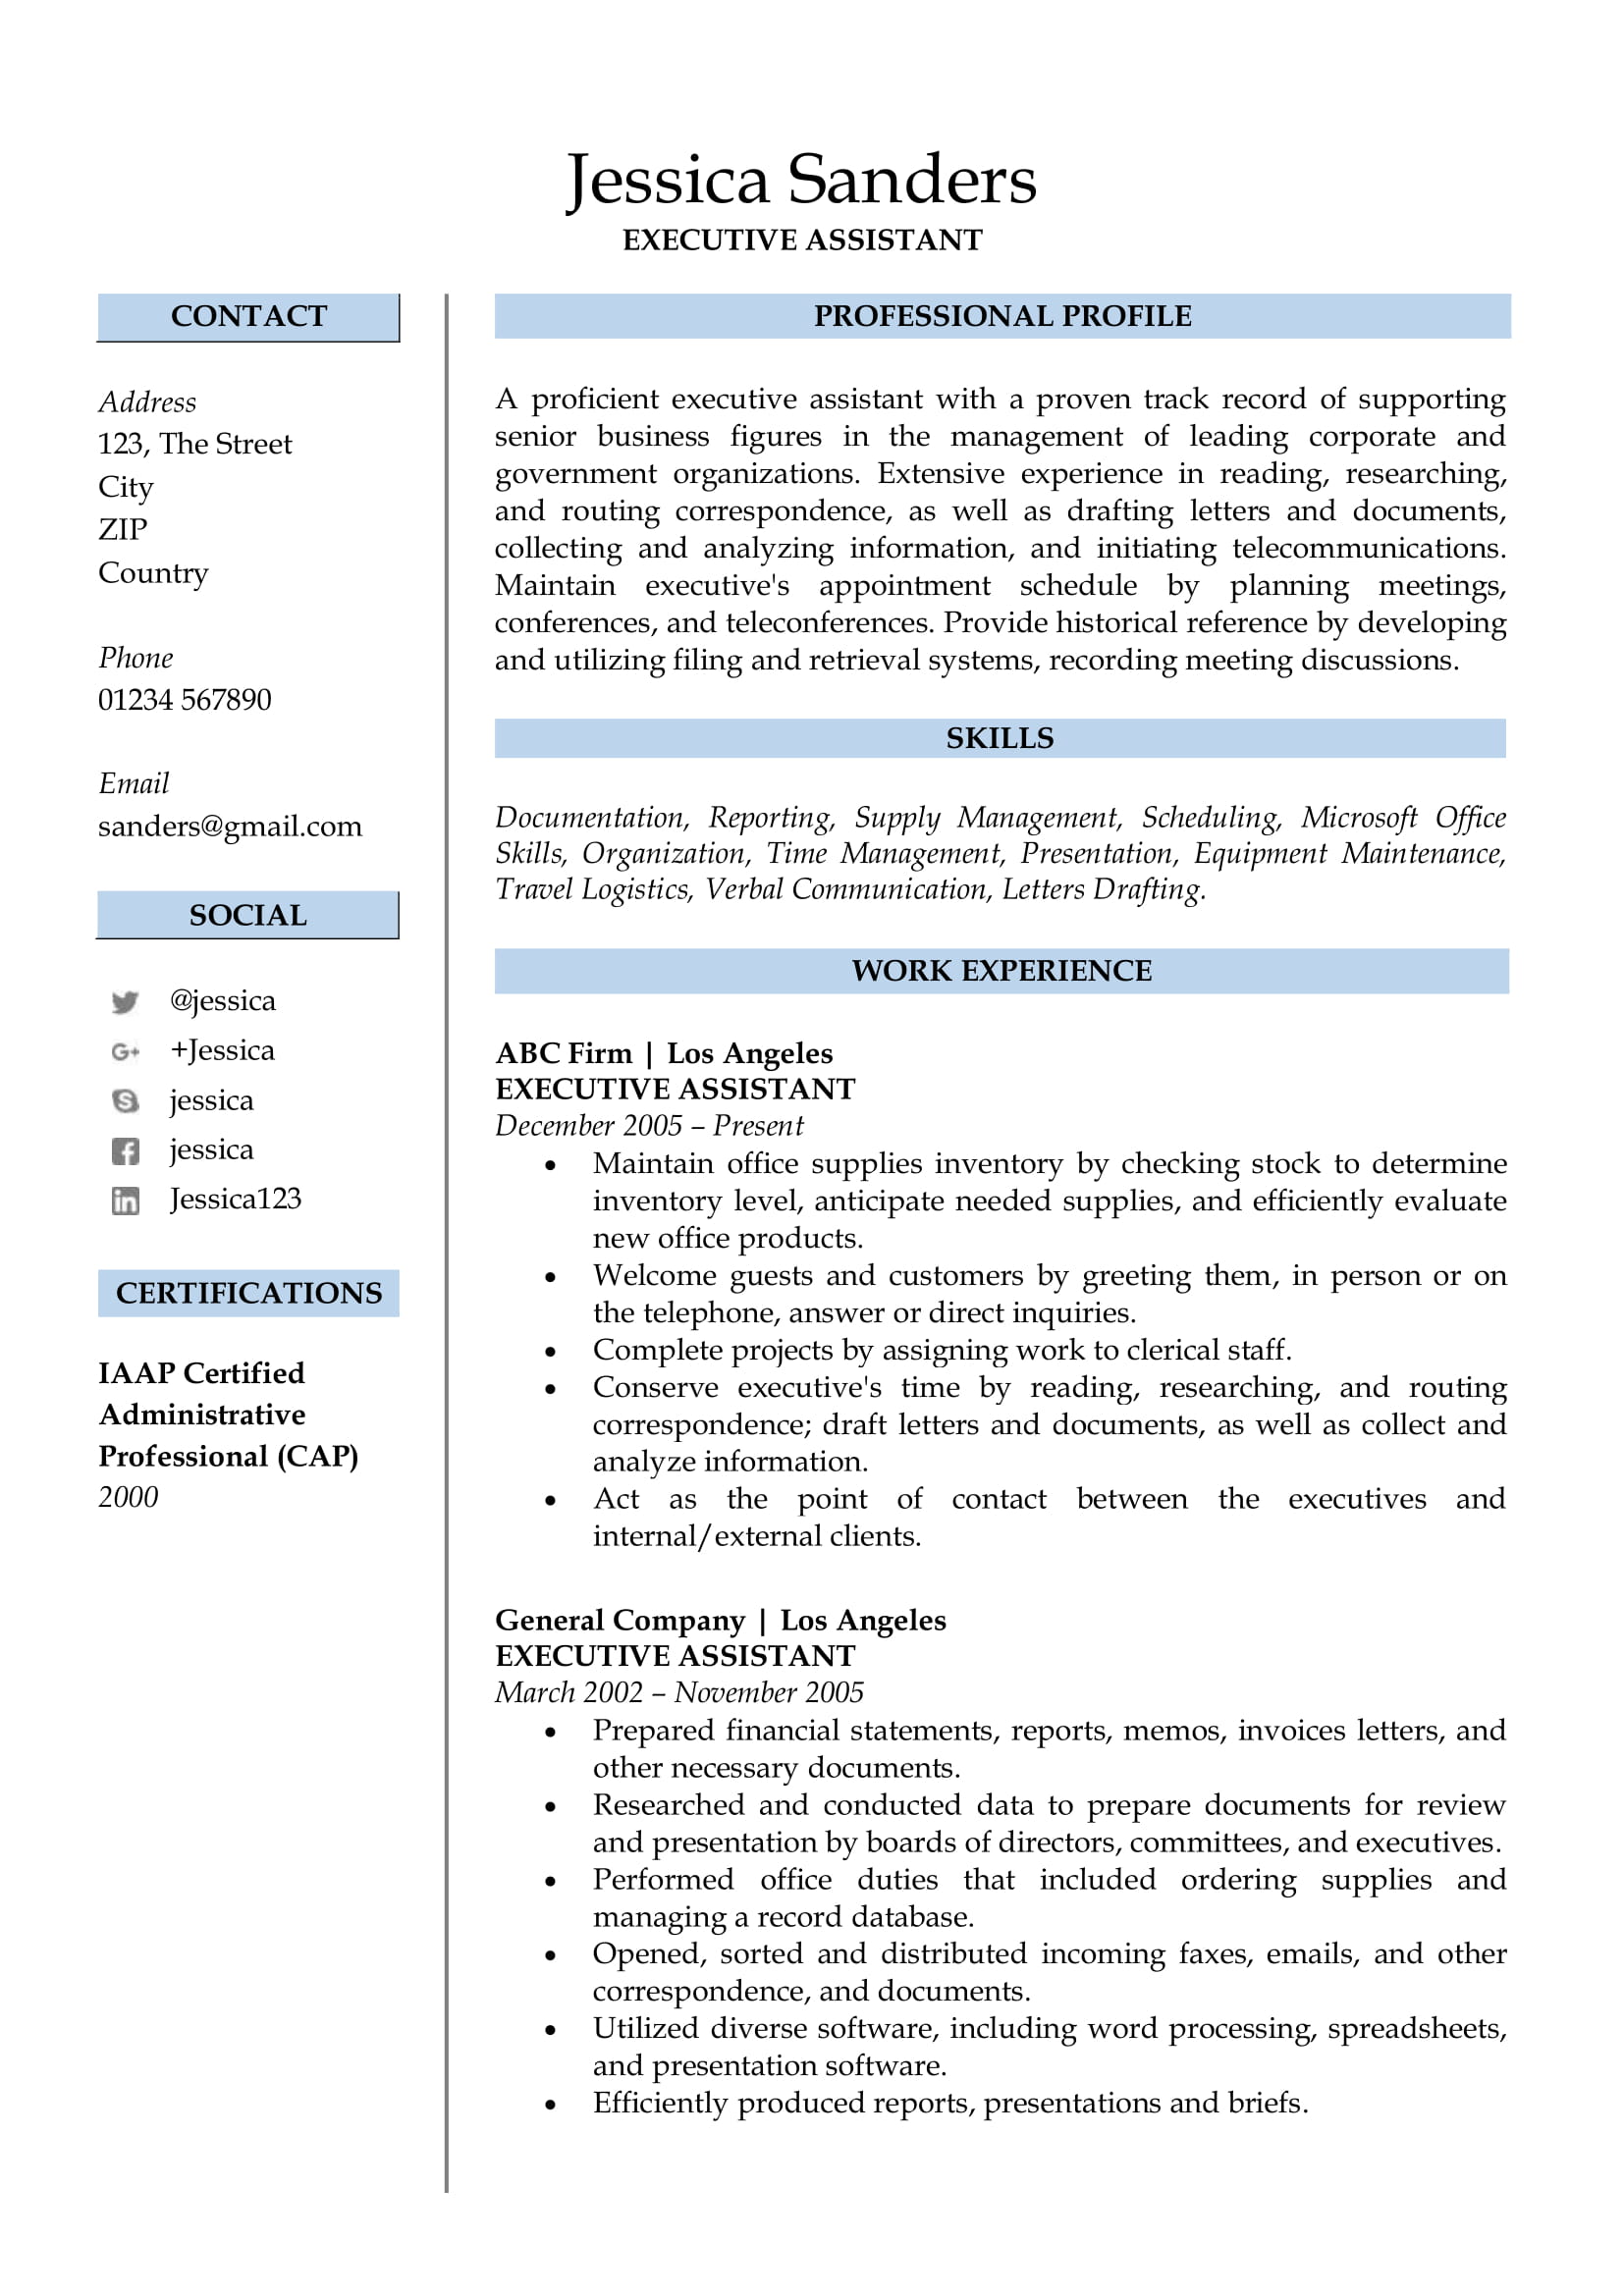 a better resume writing service naperville